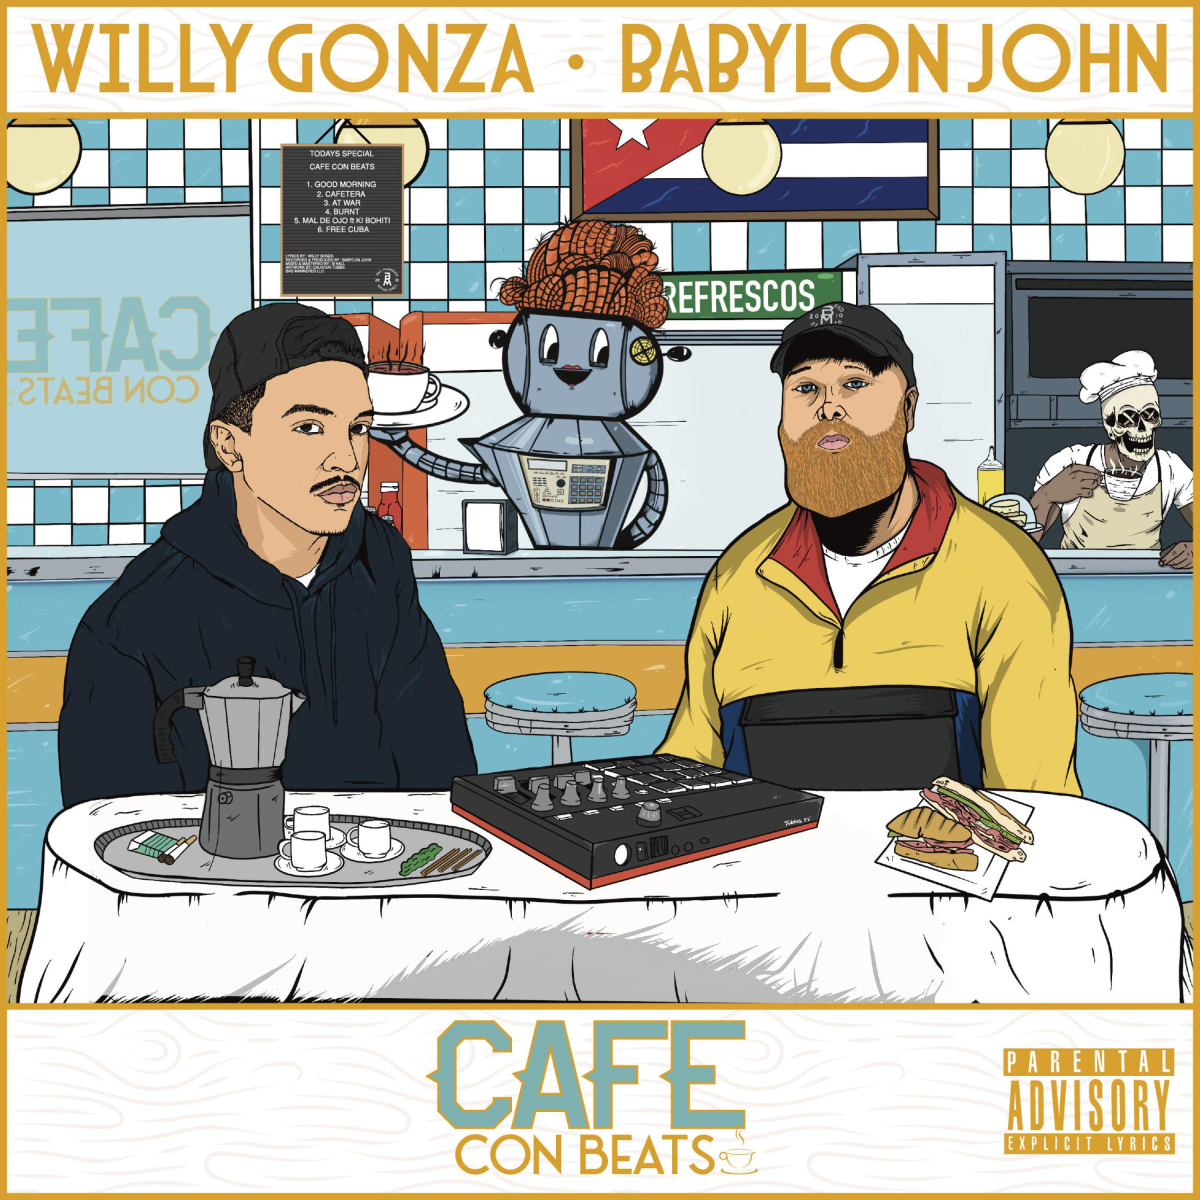 Willy Gonza and Babylon John Collab And Release “Cafe Con Beats”